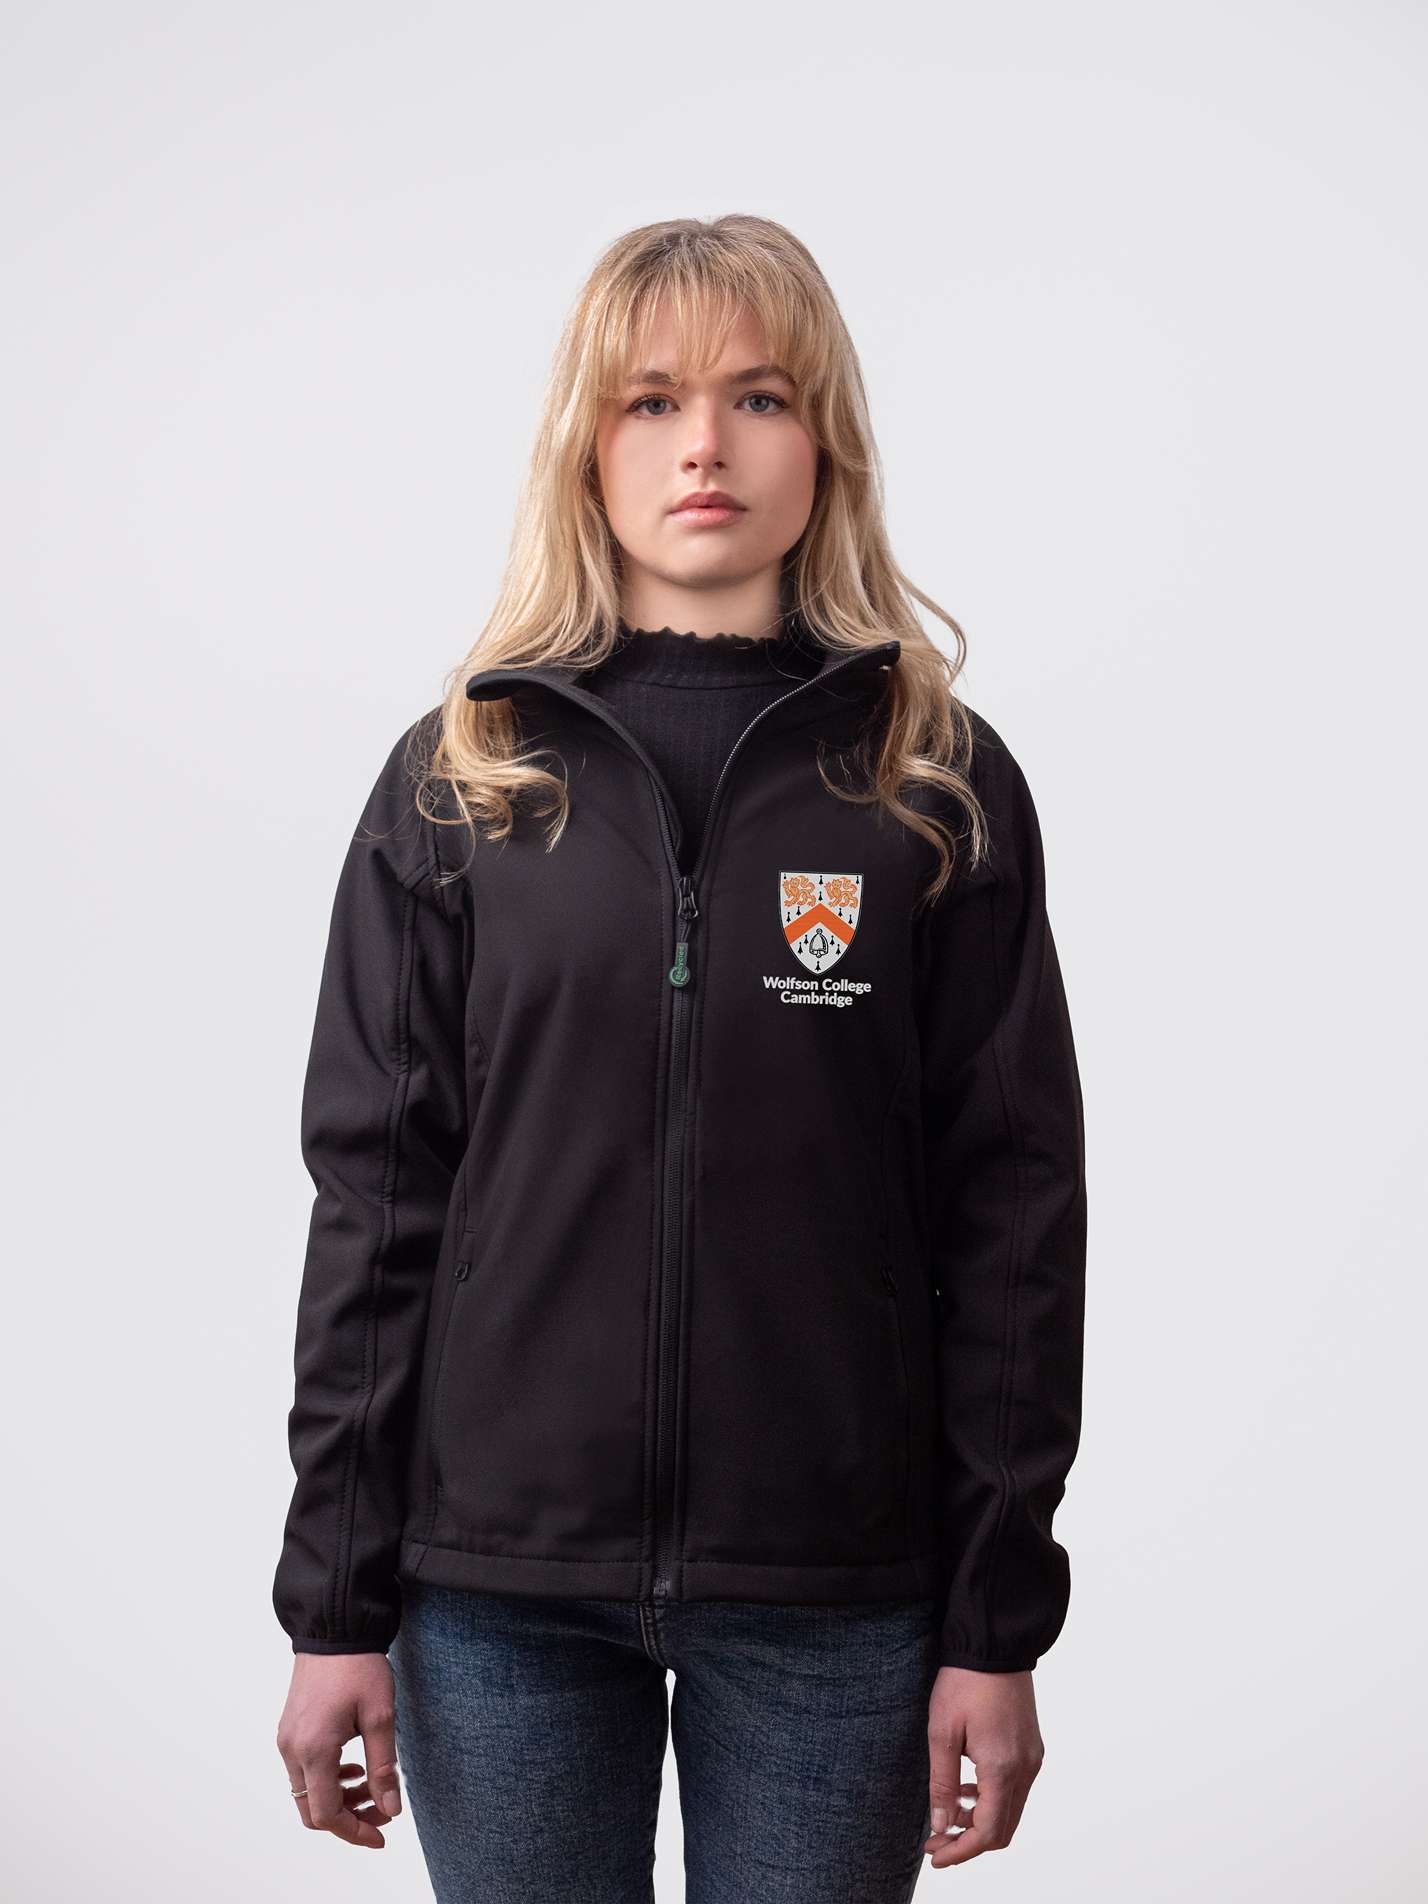 A student wearing a sustainable, Wolfson College embroidered jacket